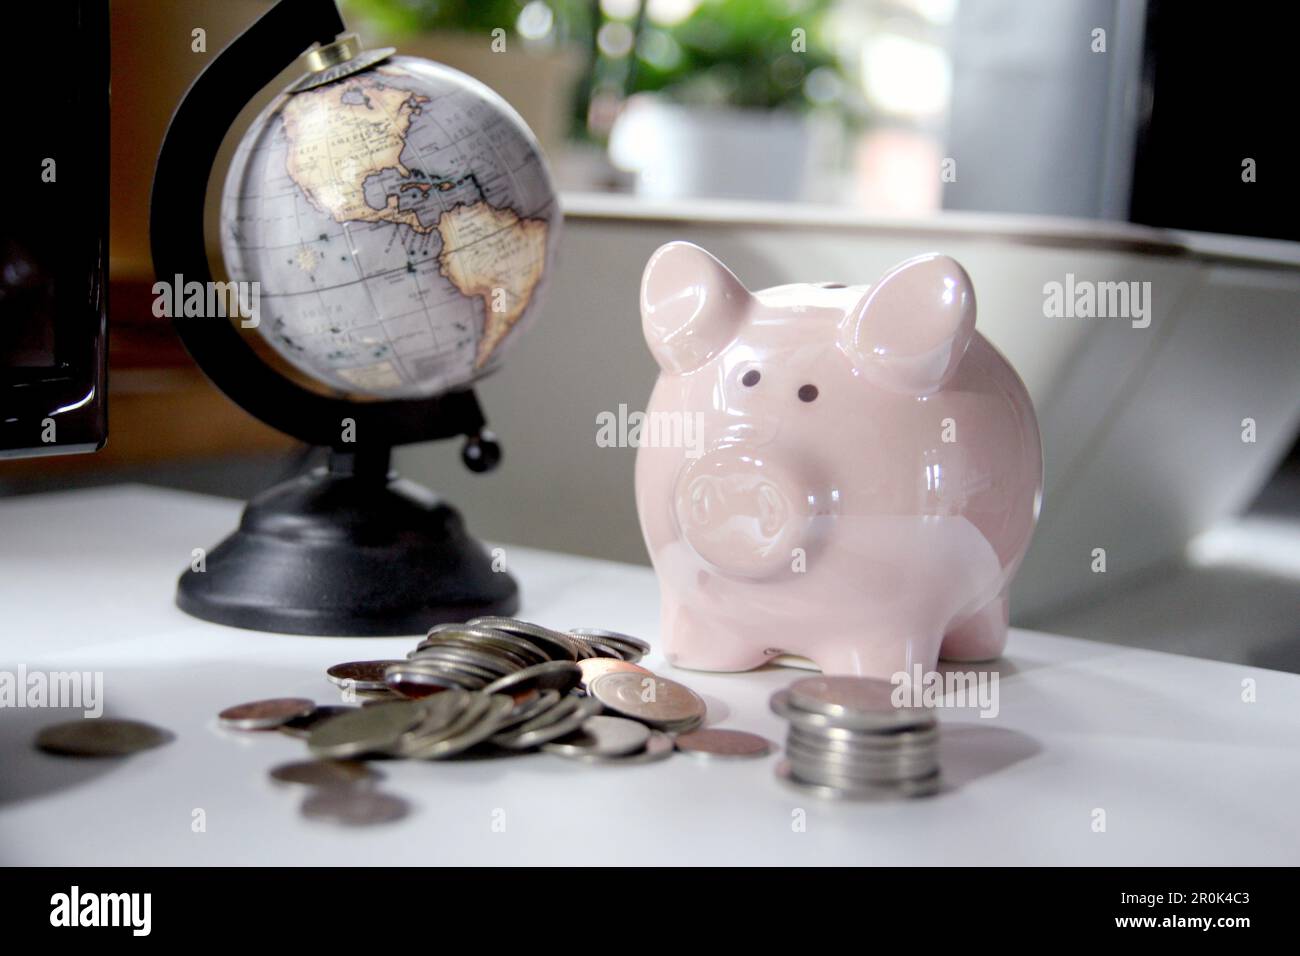 An image of a finance and business concept centered around a piggy bank on an office table Stock Photo